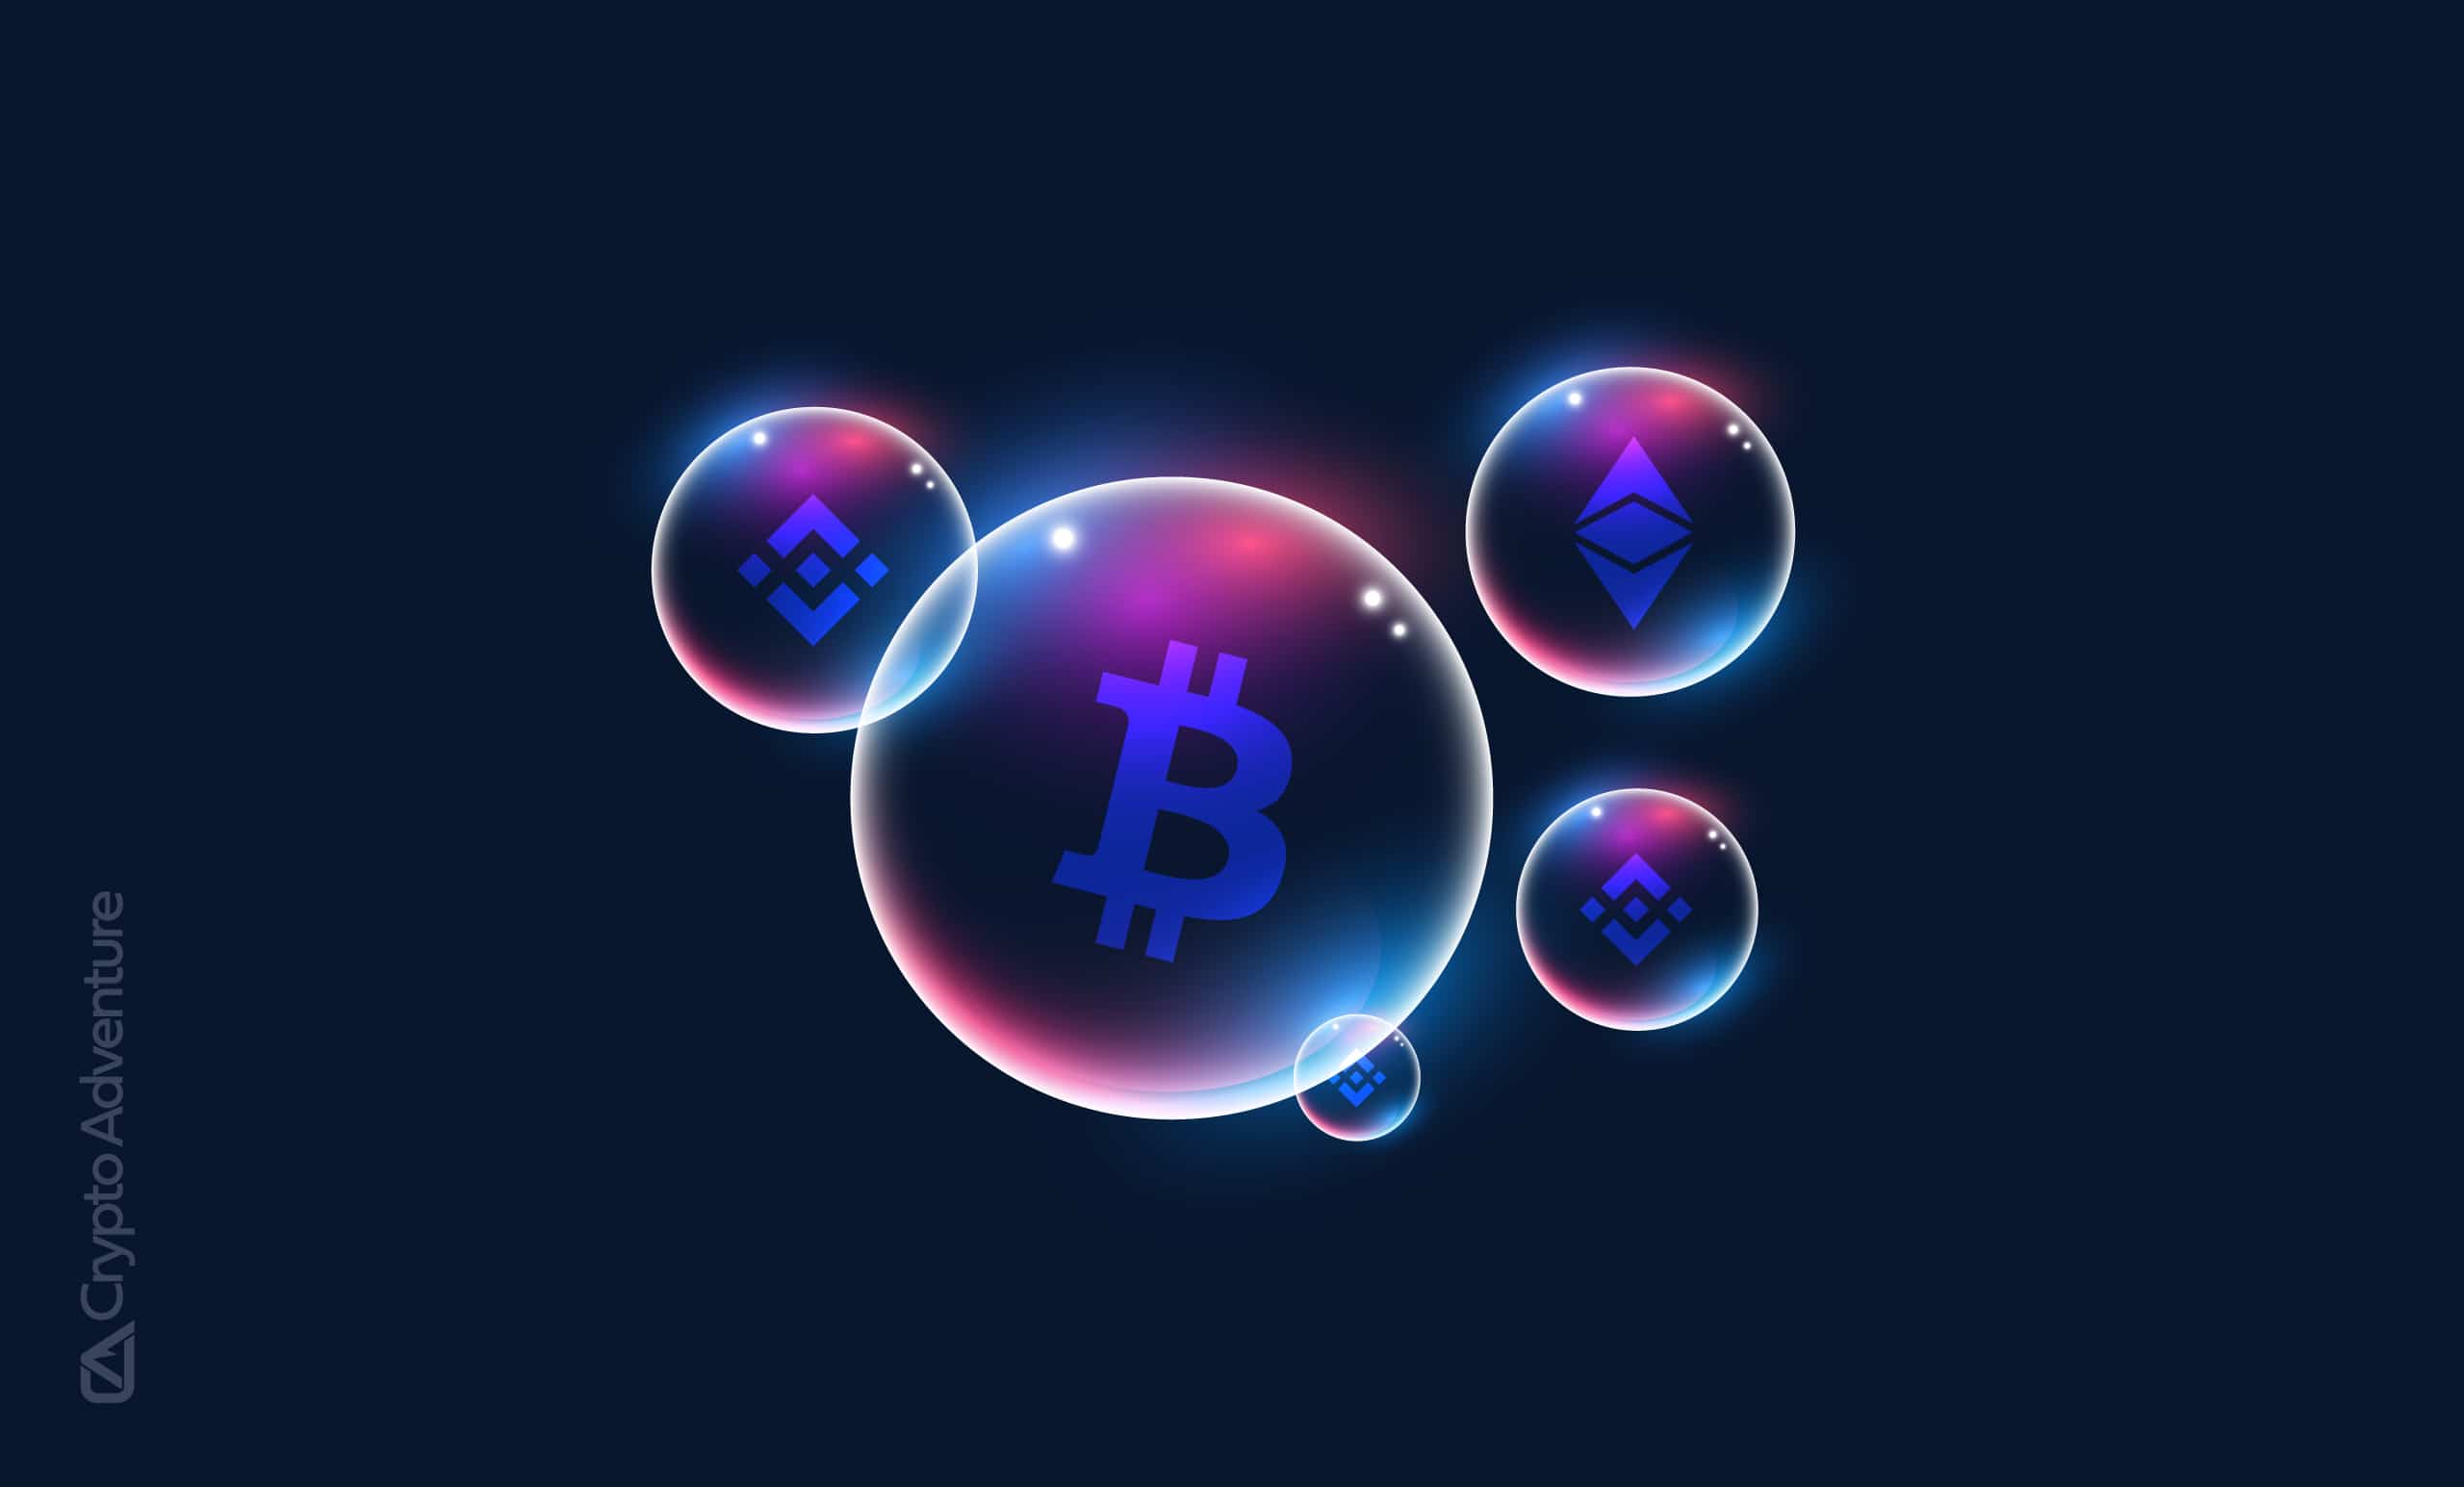 Building Blockchain & Crypto Apps on Bubble made easy